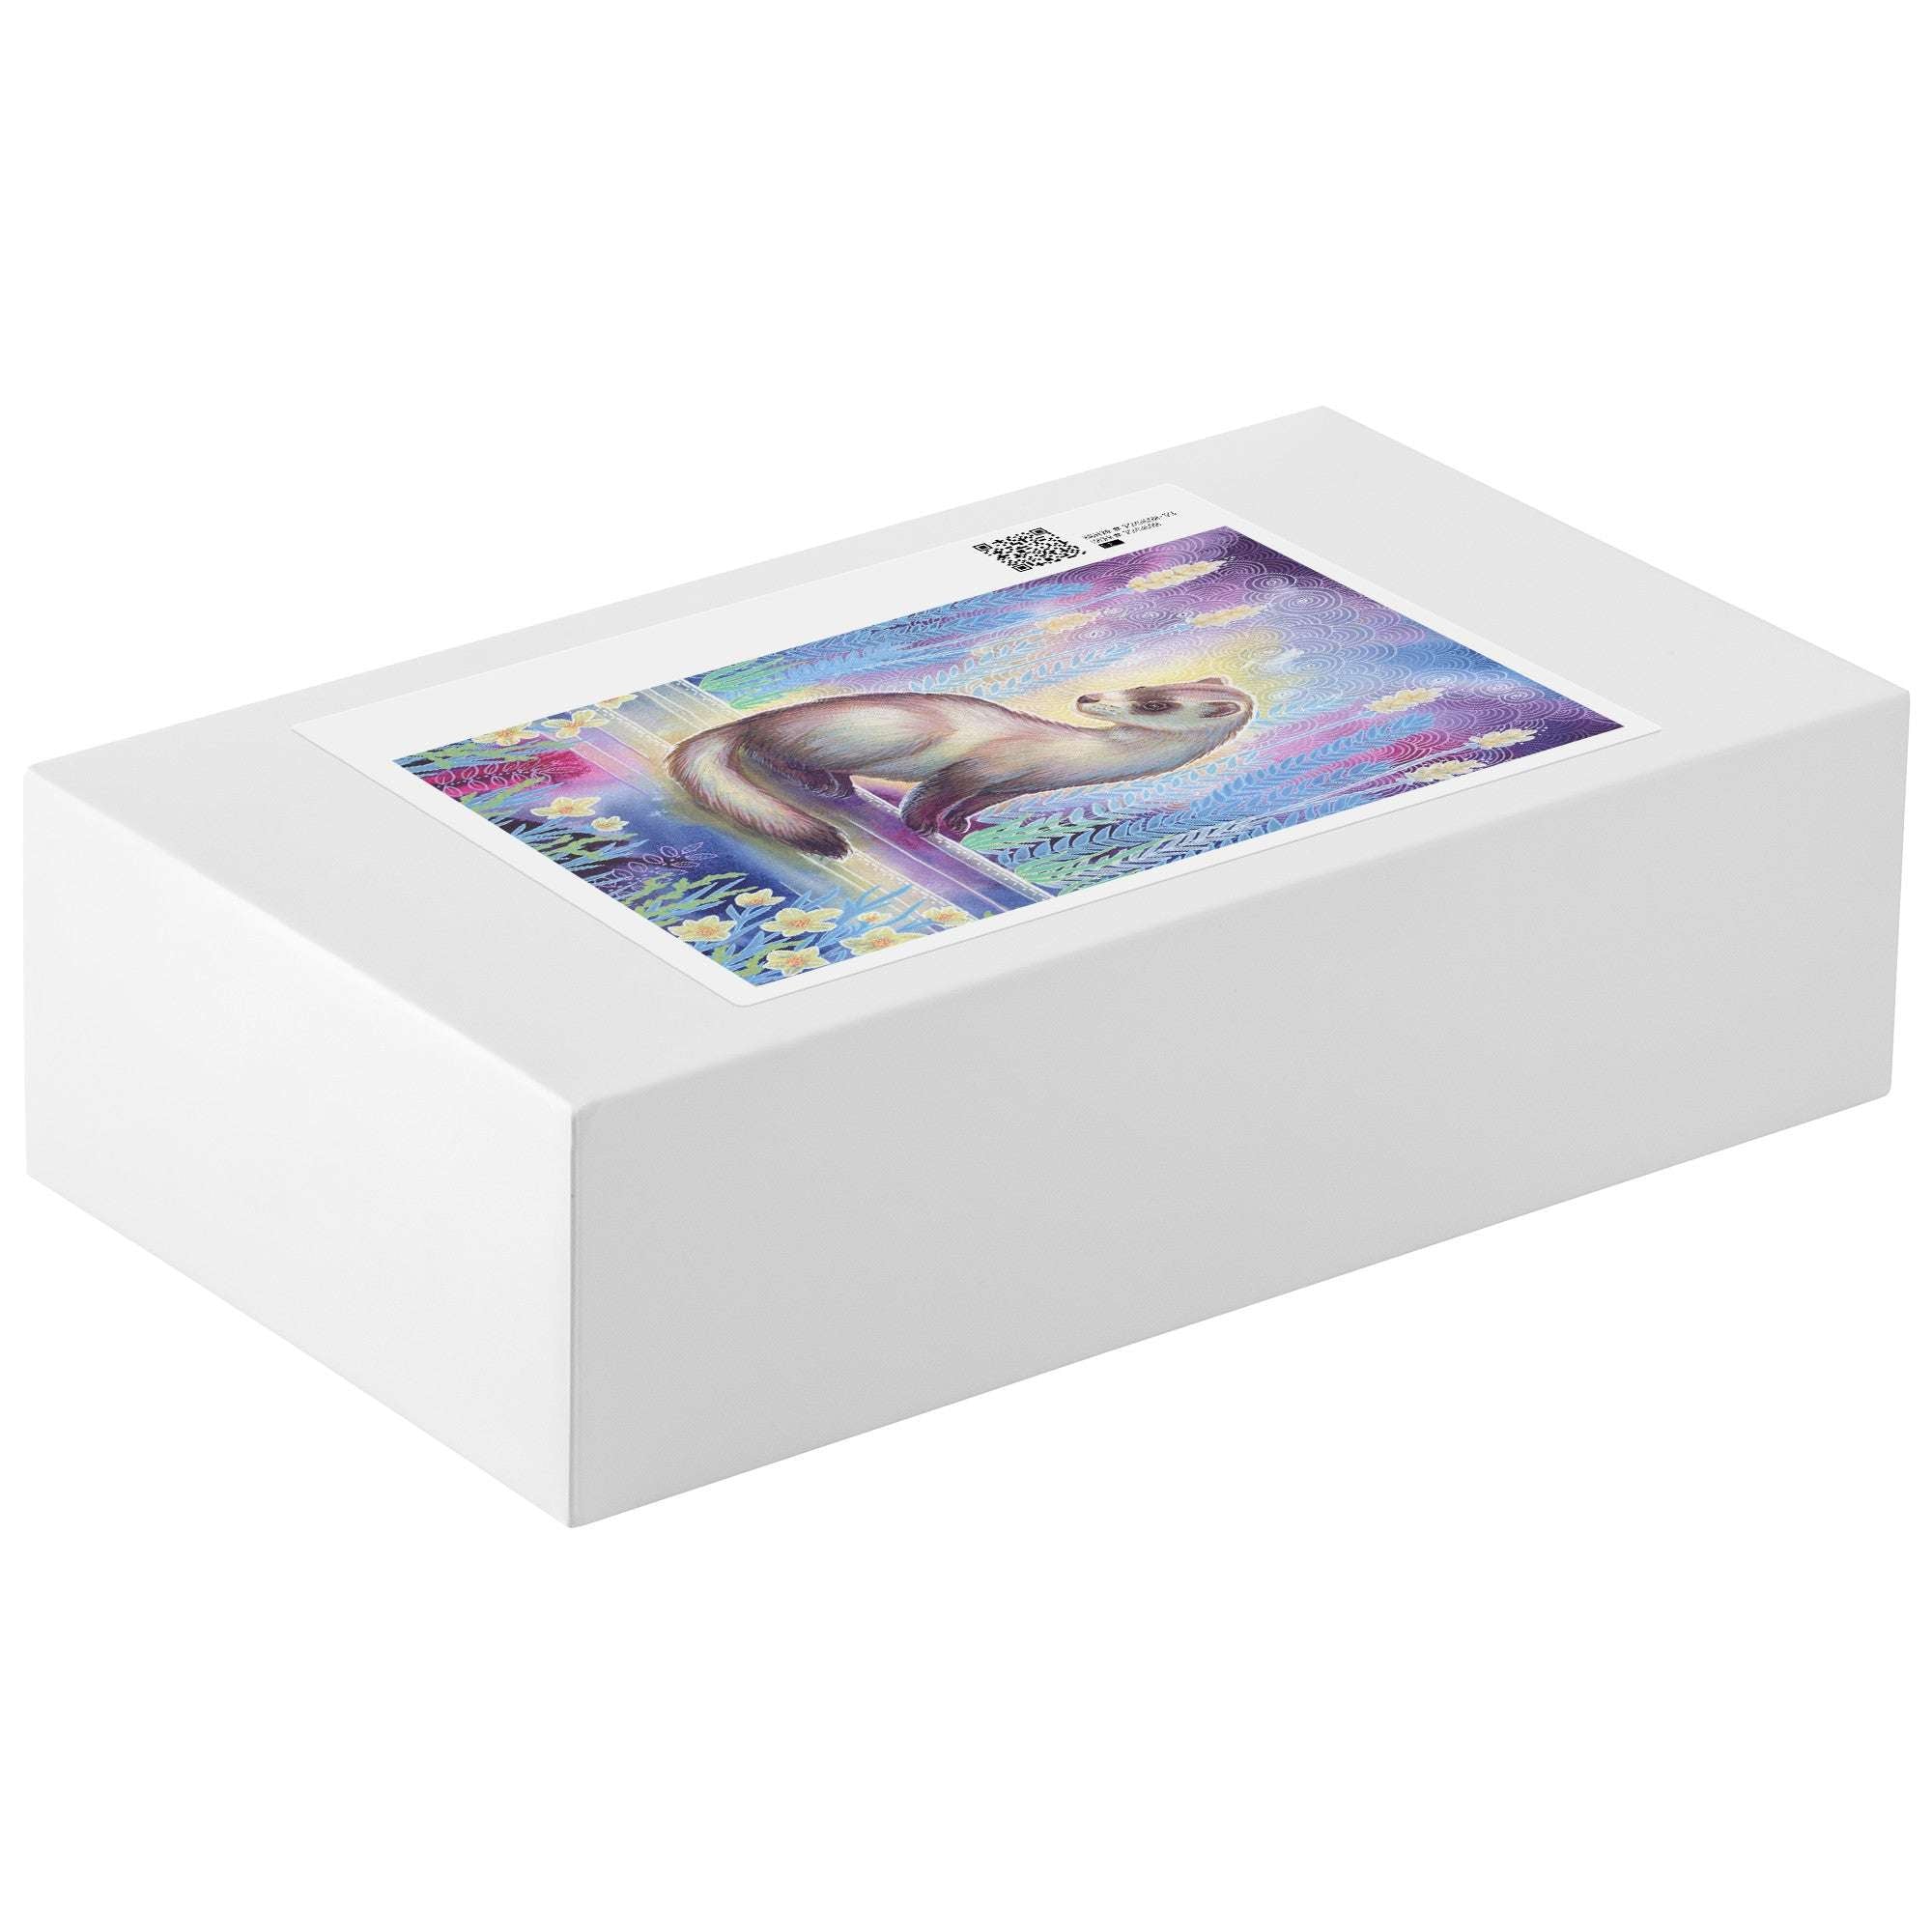 A white rectangular box with a vibrant, colorful Ferret Puzzle image on its lid.